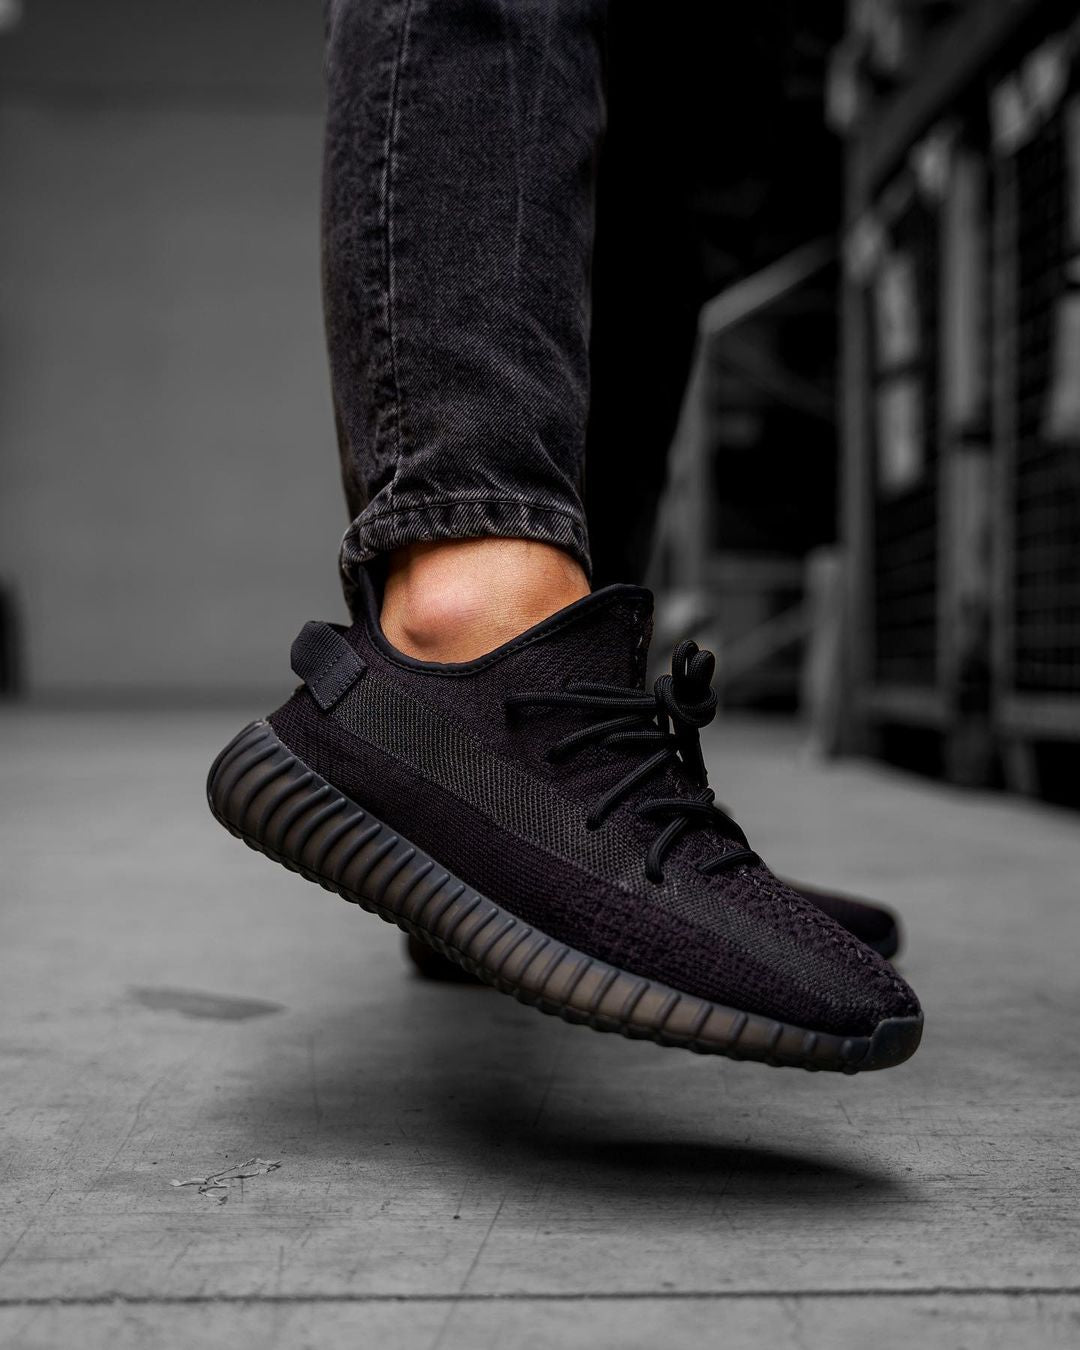 Adidas Yeezy Boost 350 V2 | Sneakers per Uomo e Donna | ResellZone